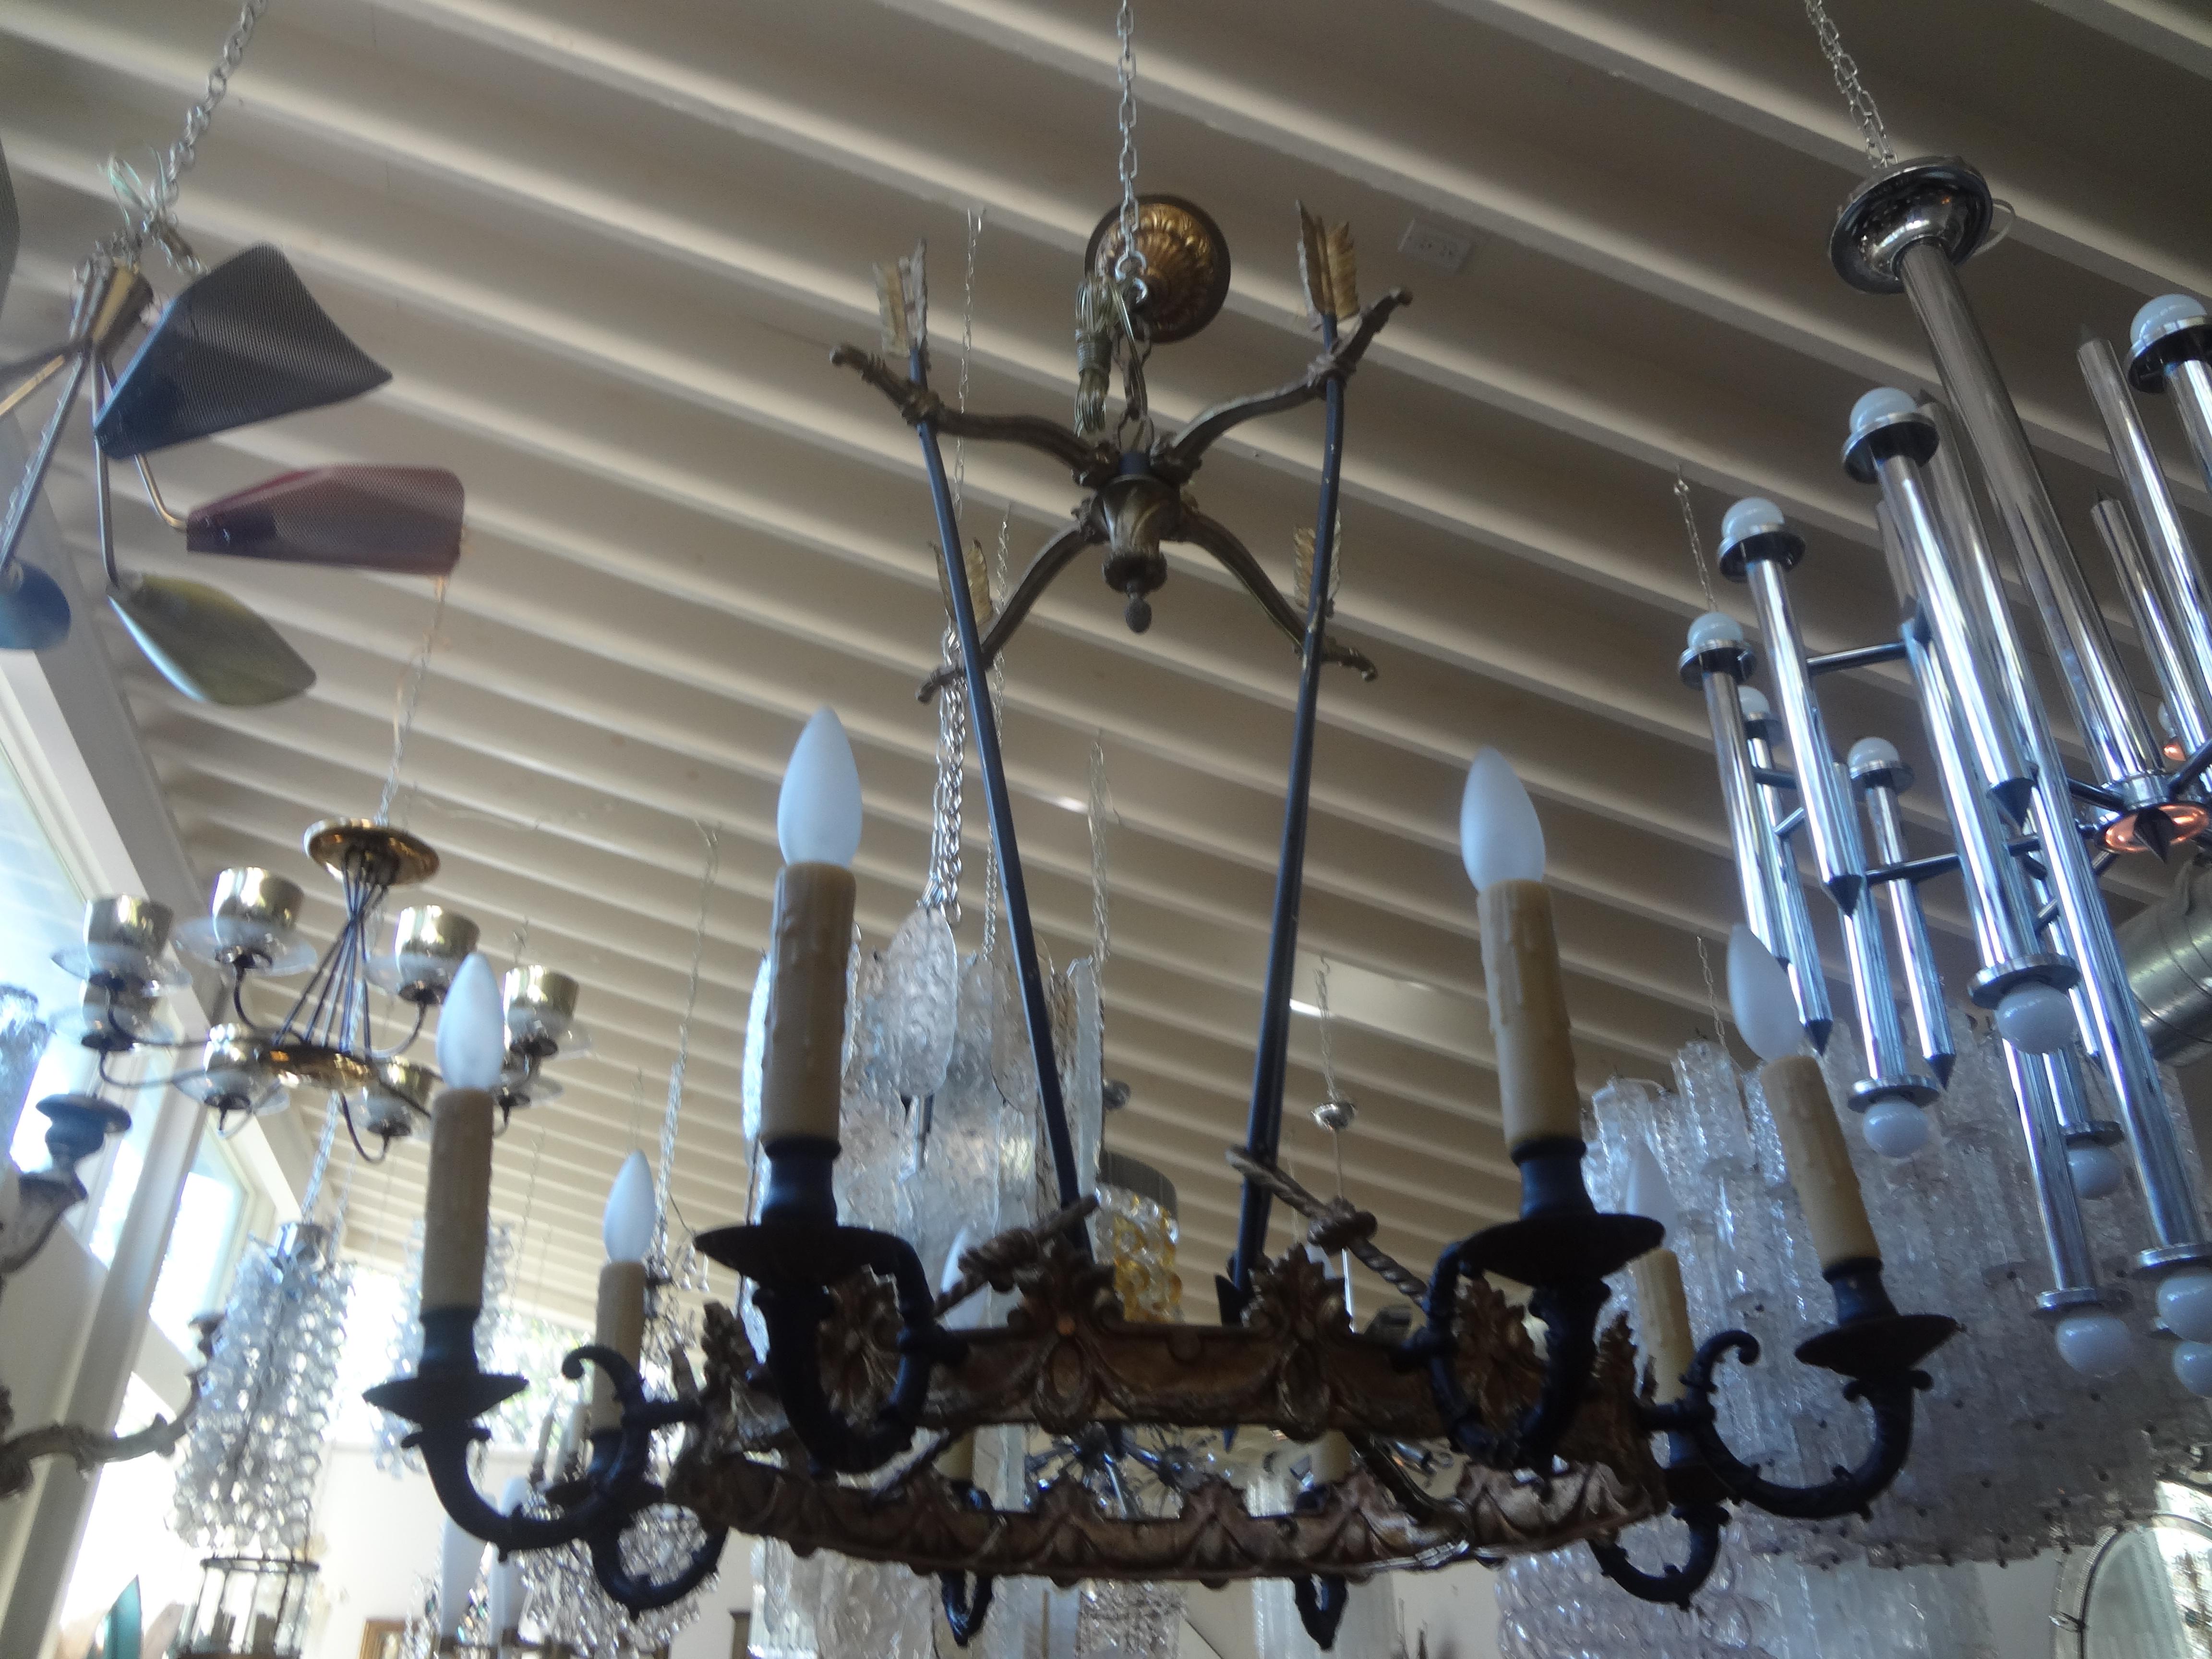 French Empire Style Bronze Chandelier With Arrows.
This stunning French Empire style or Directoire style gilt bronze and patinated bronze quiver and arrow chandelier features eight lights and has been newly wired to U.S. specifications. Each arm has